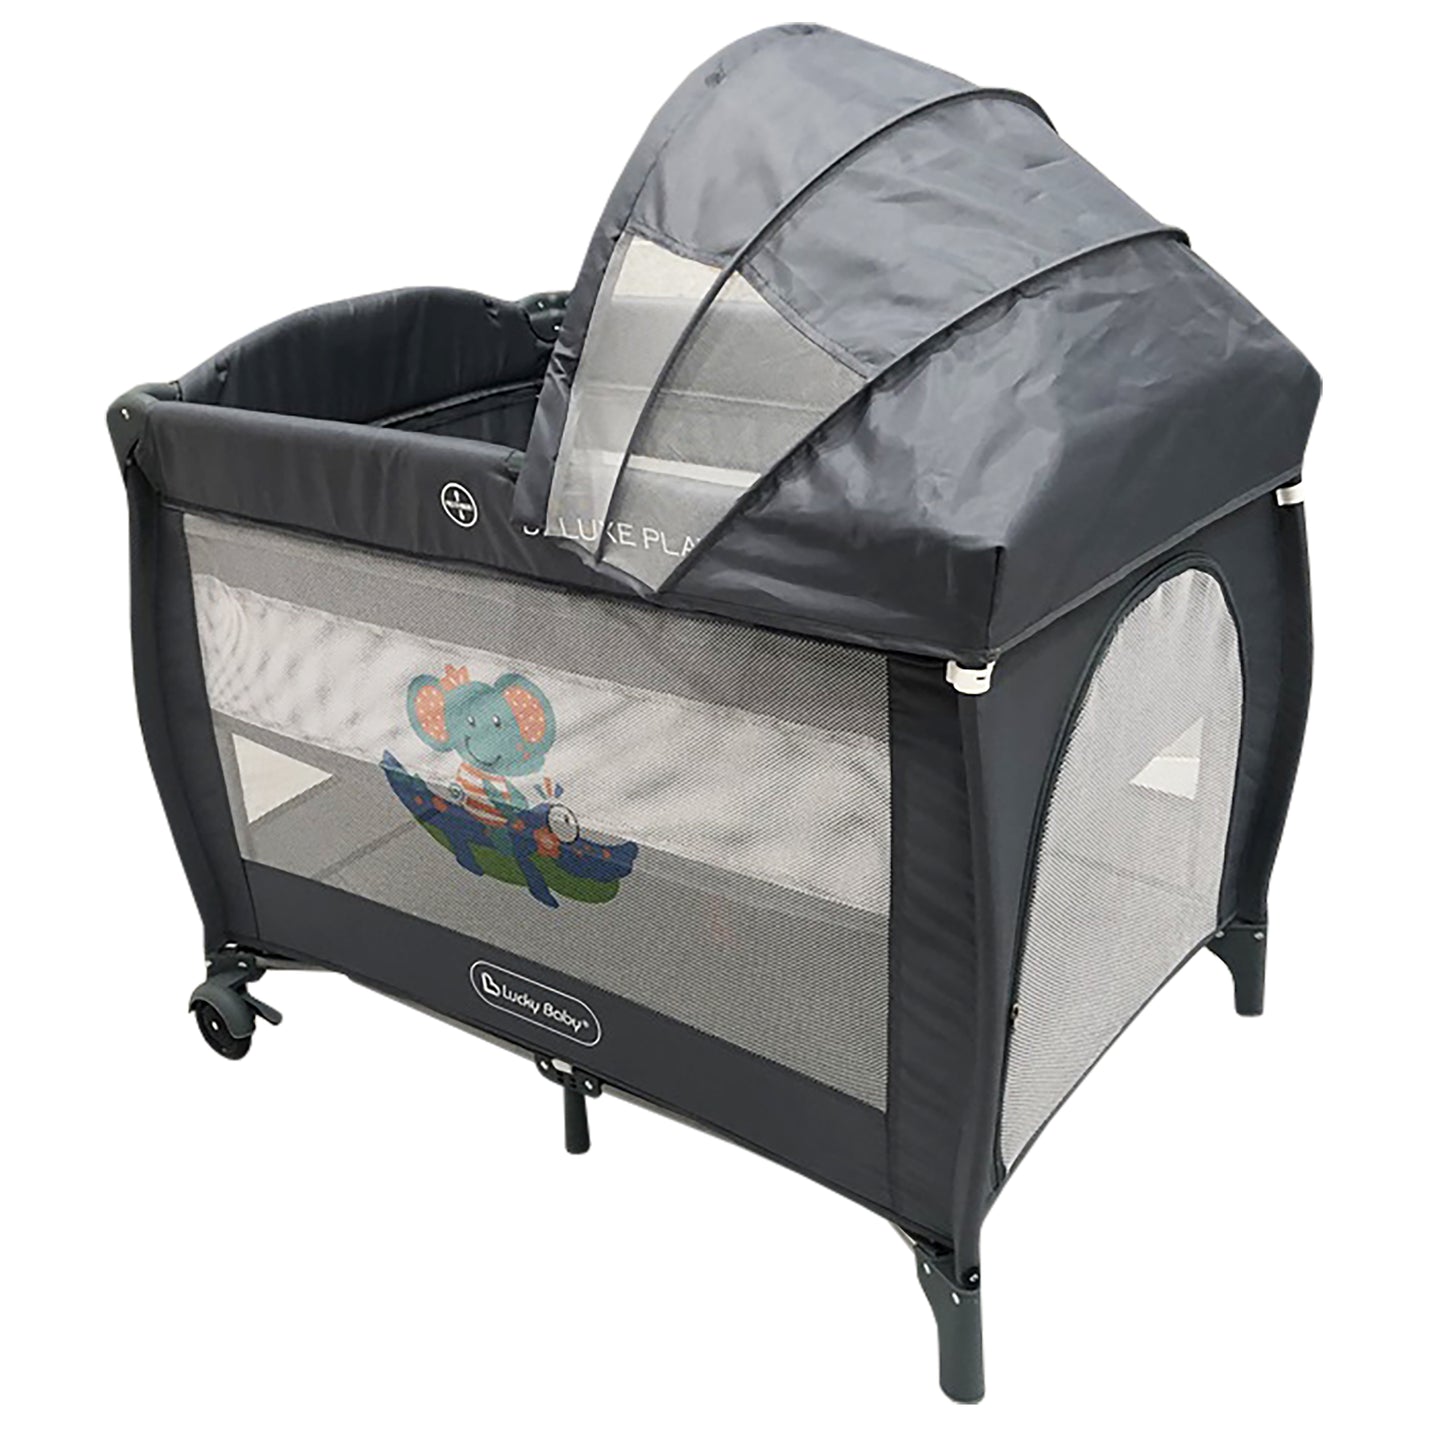 S11 Travel Deluxe Playpen With Canopy